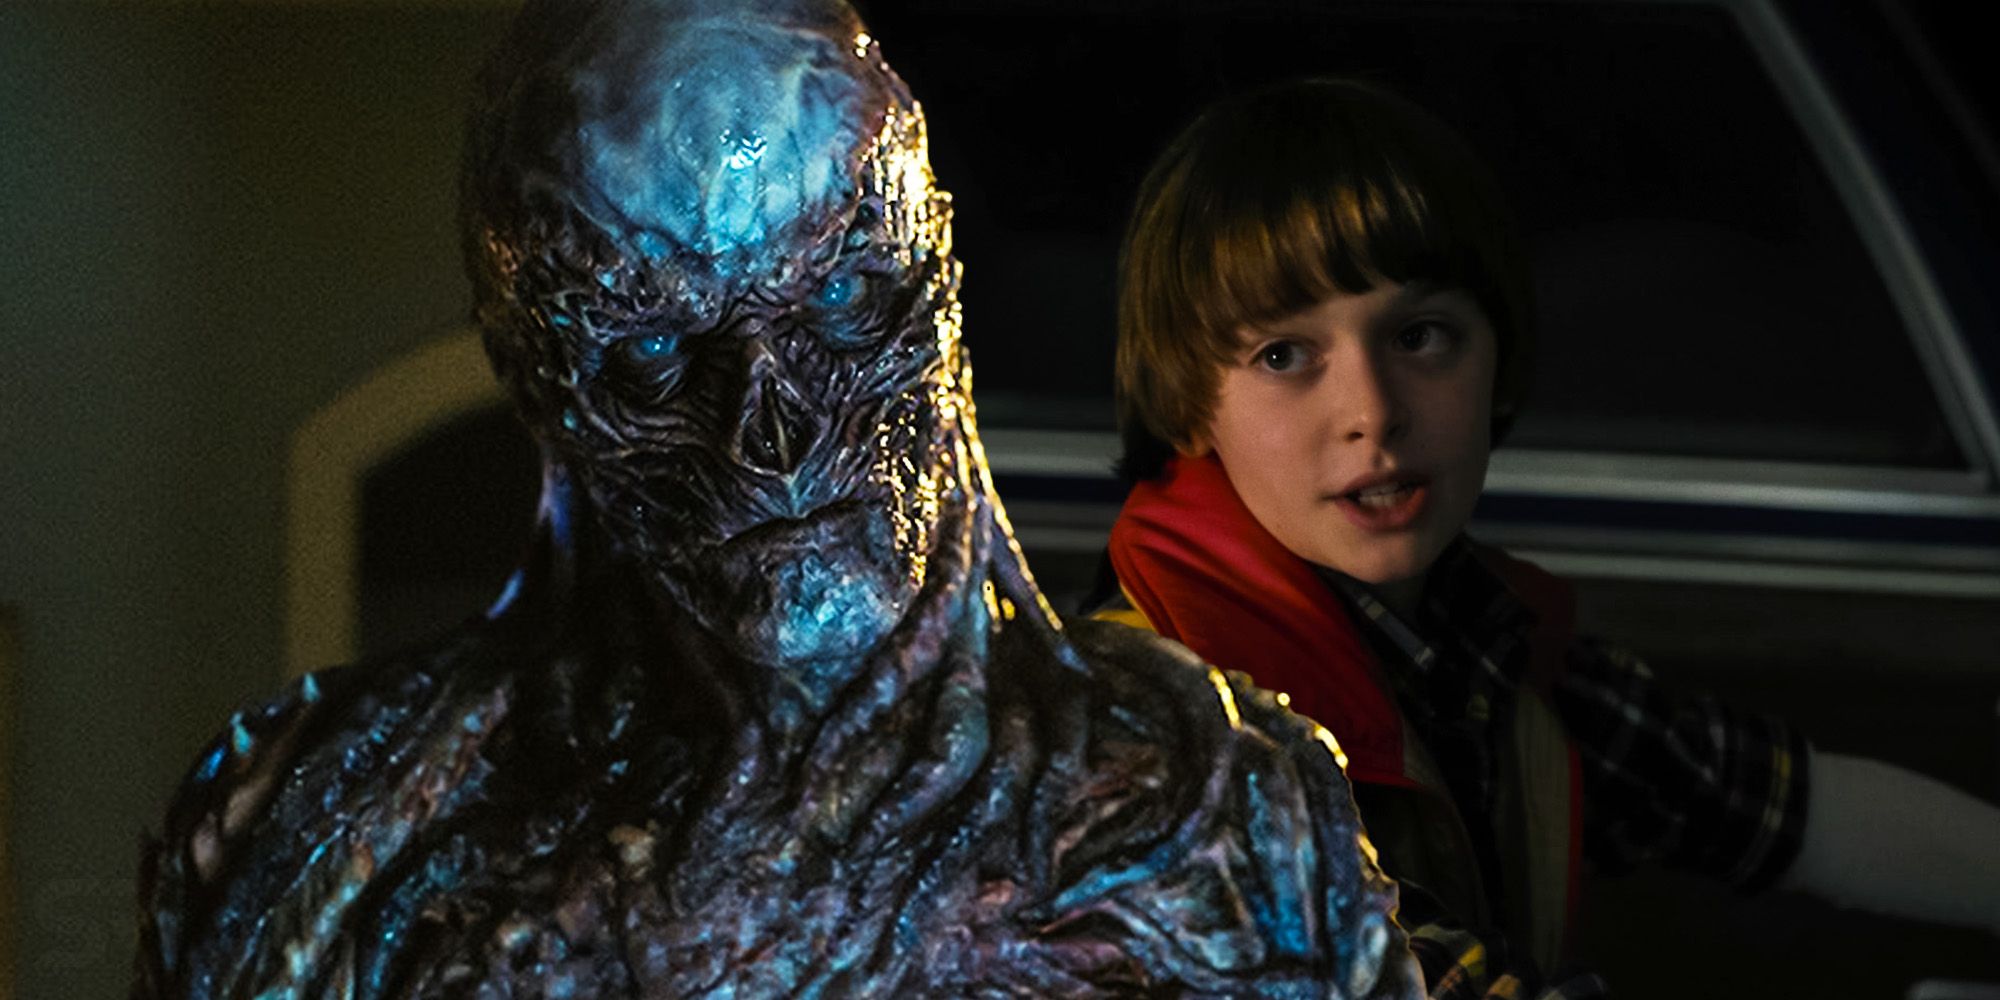 Vecna is Eleven's father, Will Byers to turn evil: Stranger Things